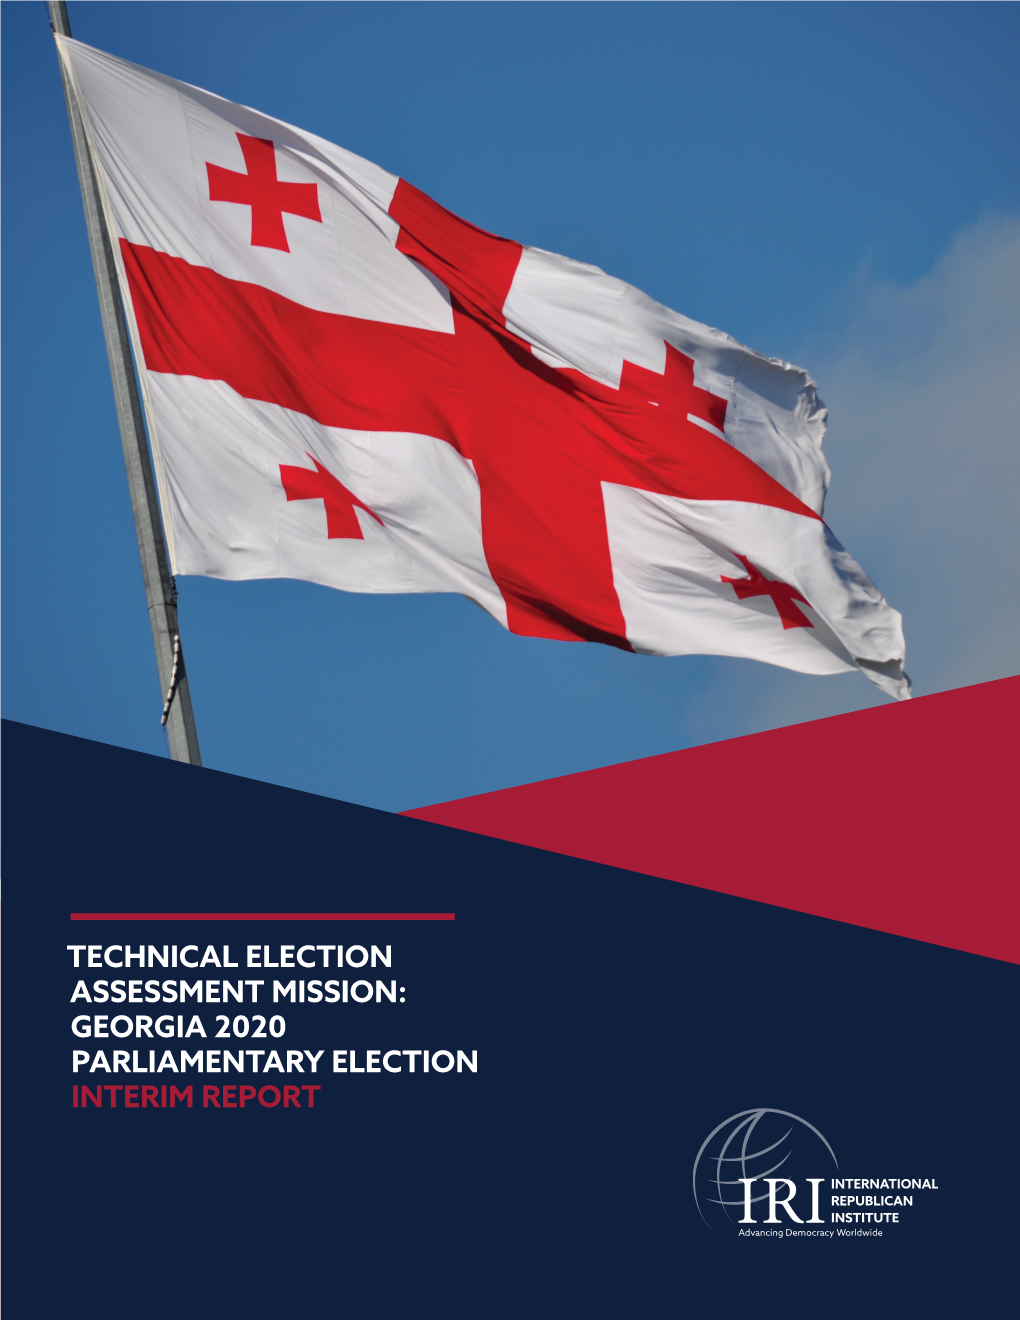 Technical Election Assessment Mission: Georgia 2020 Parliamentary Election Interim Report